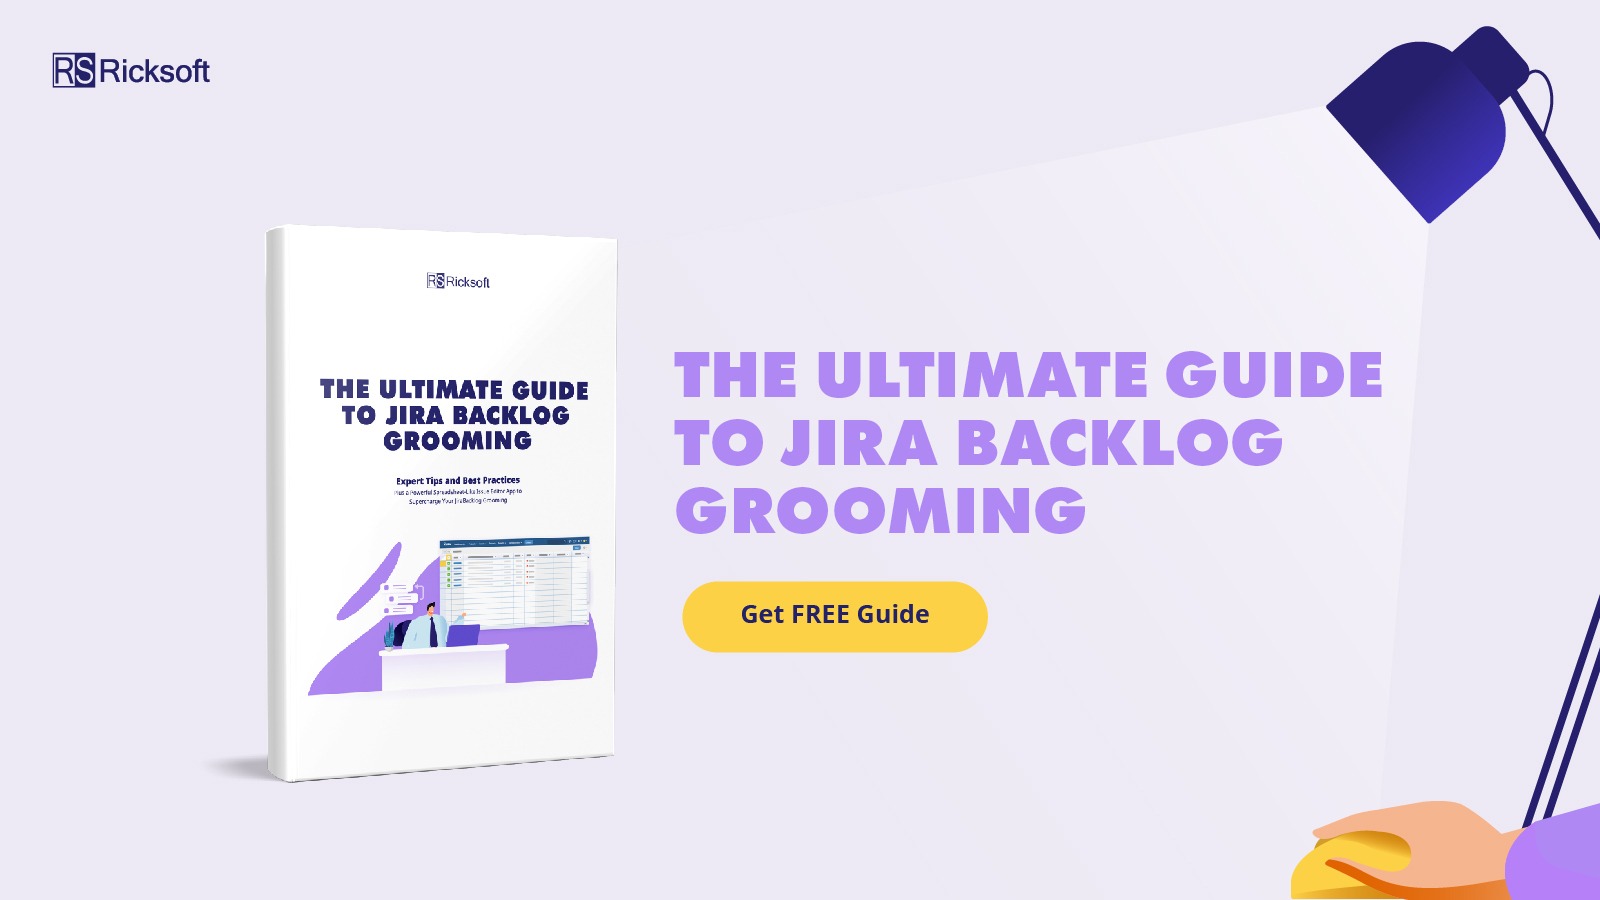 Get your free guide to Jira backlog grooming